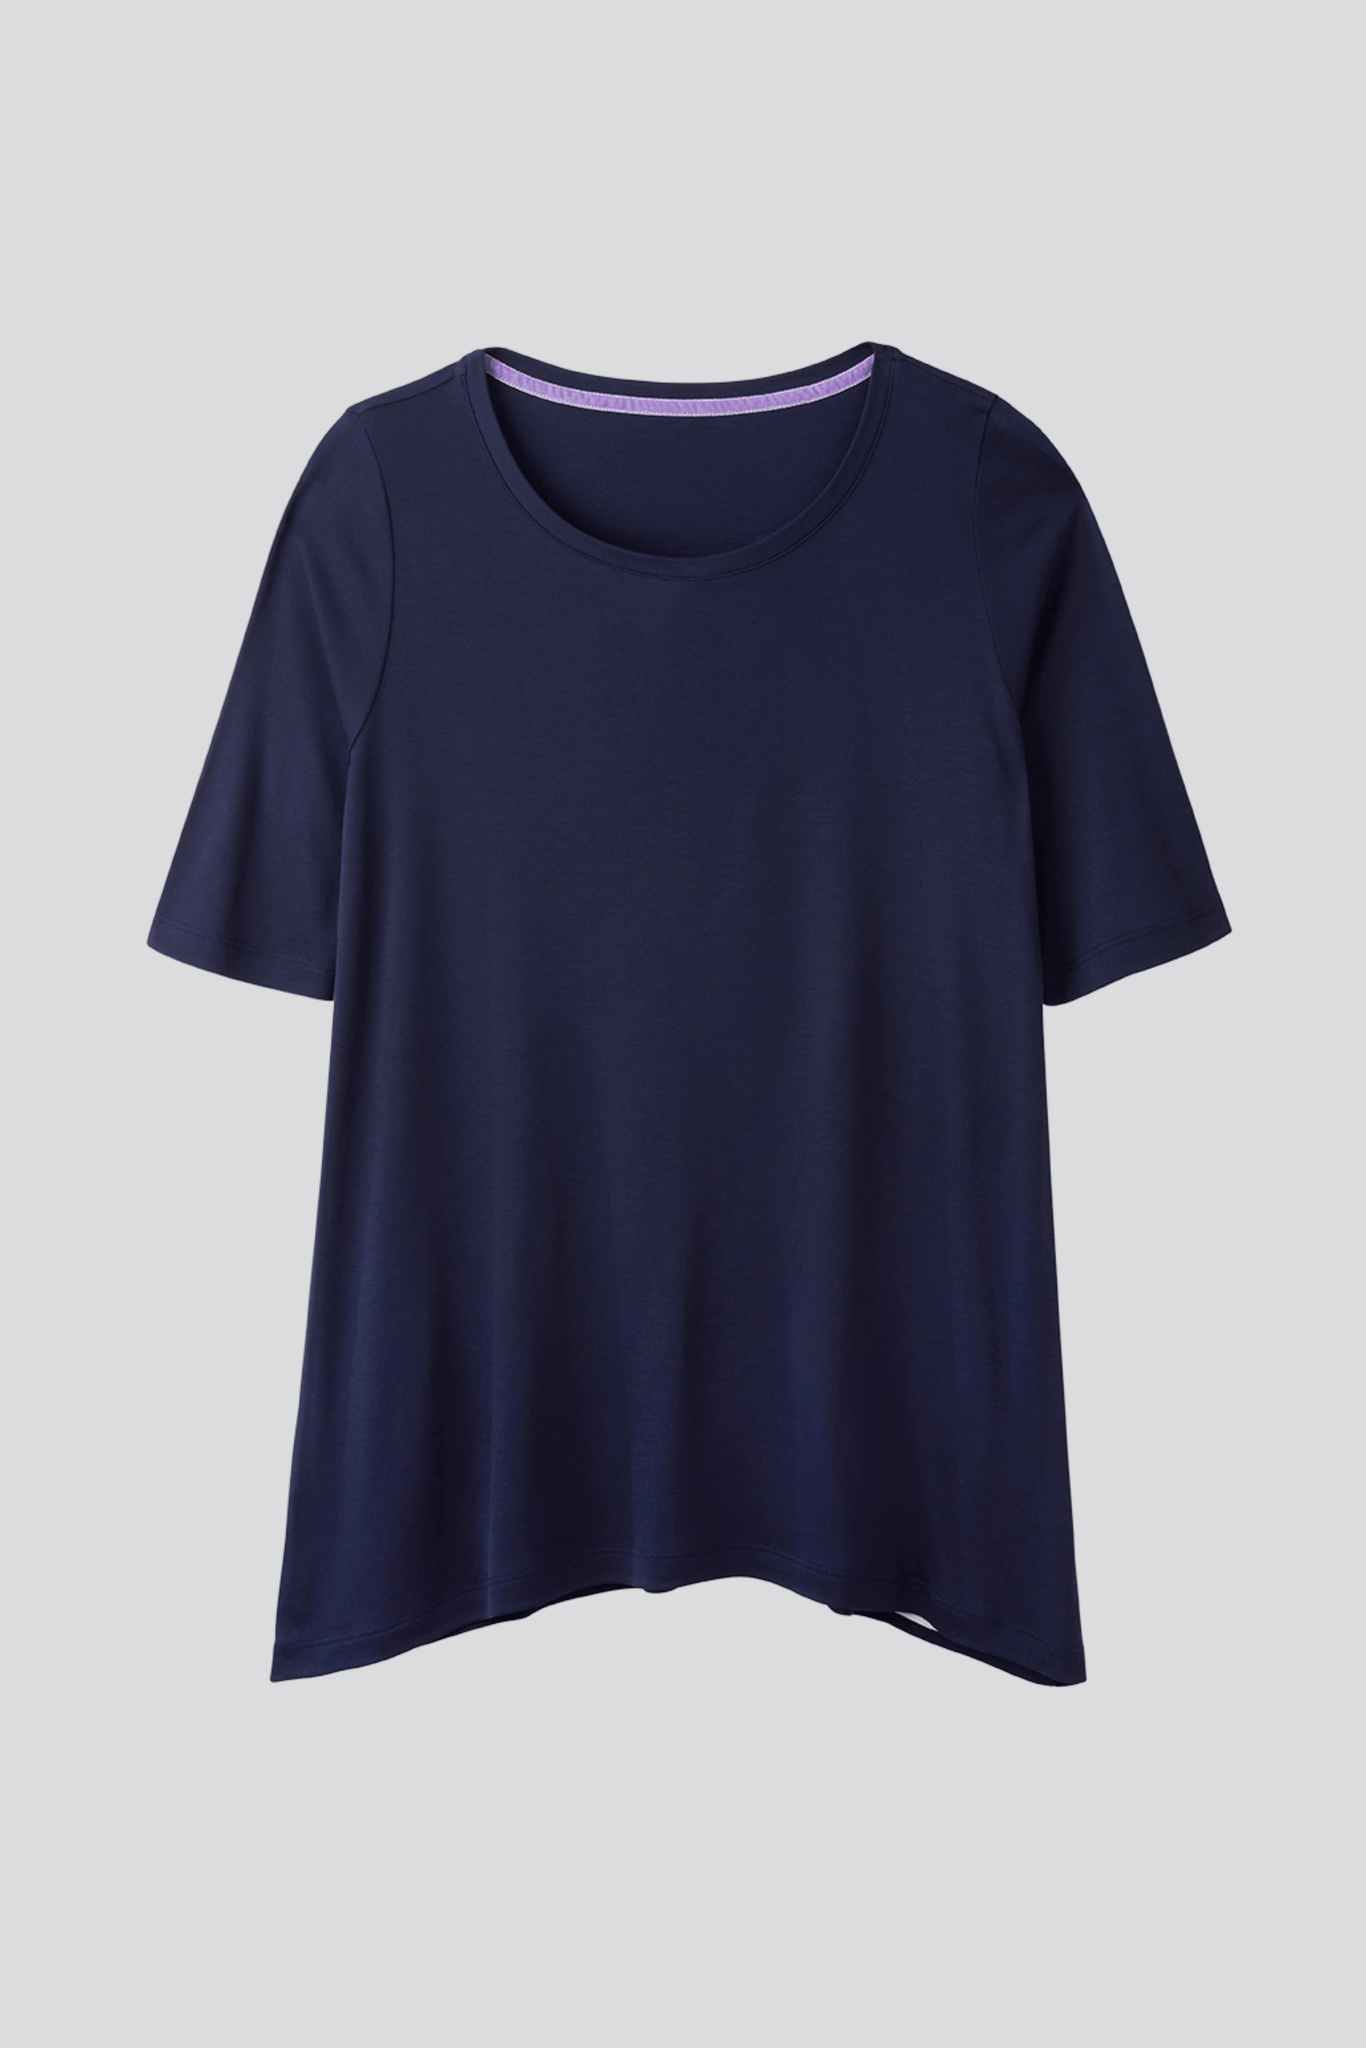 Navy Mid Sleeve A-line Micro Modal T-shirt | Flattering loose fit half sleeve womens T-shirt | Lavender Hill Clothing